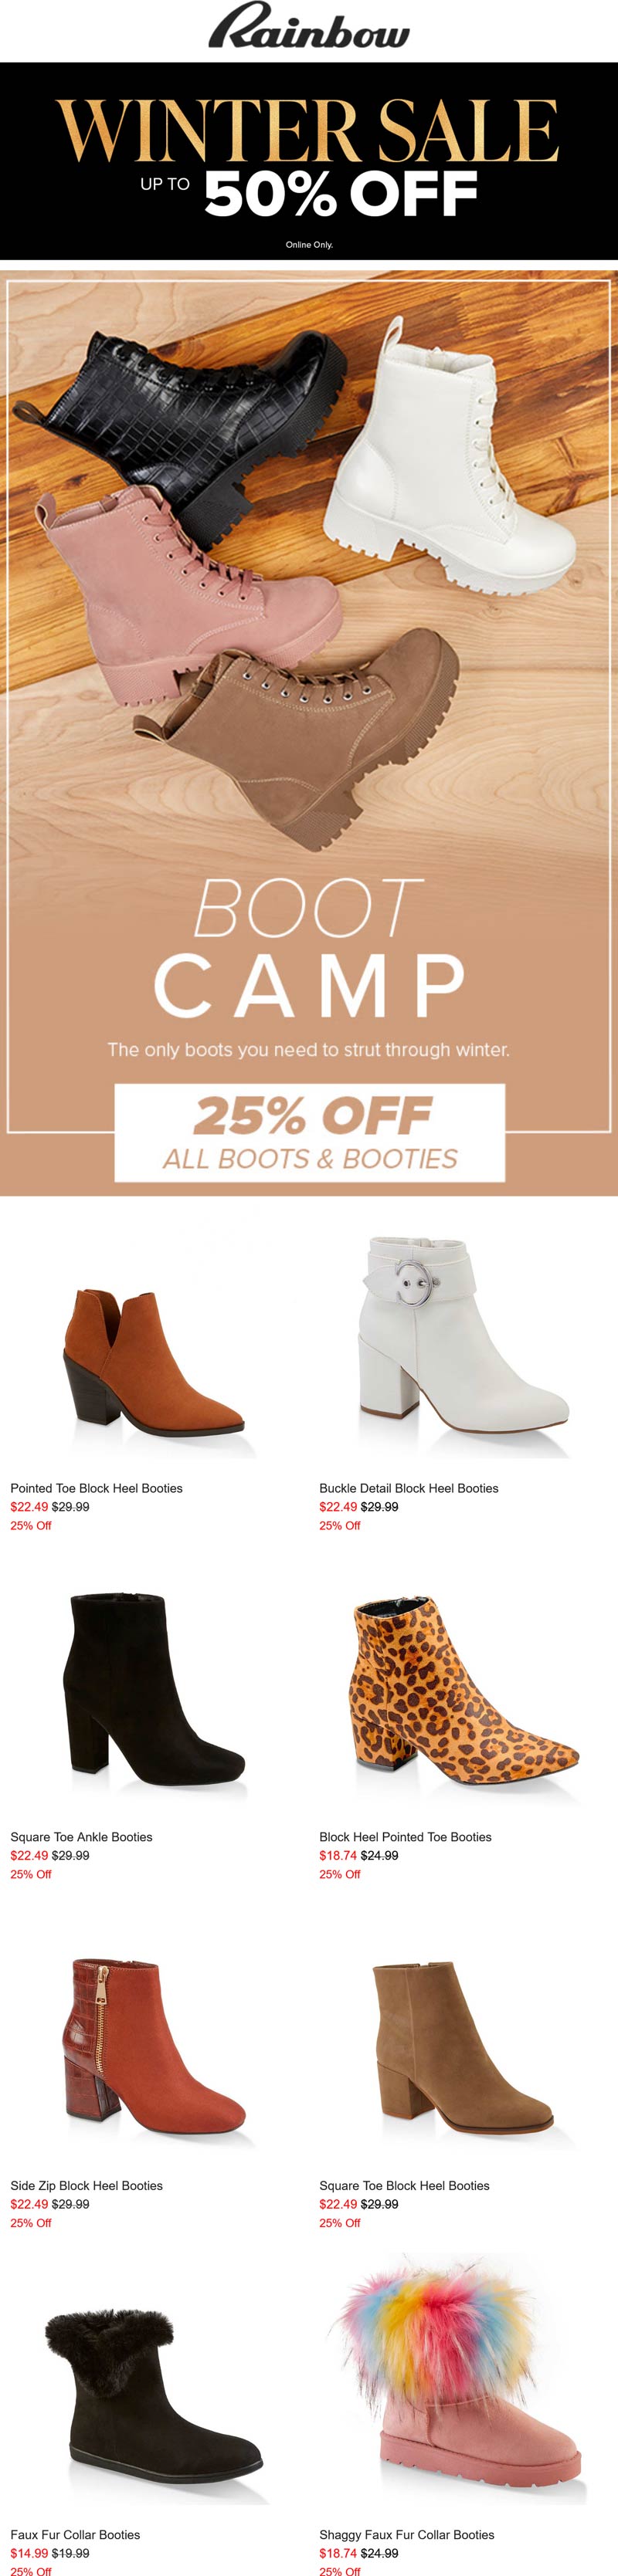 Rainbow stores Coupon  25% off all boots & booties at Rainbow #rainbow 